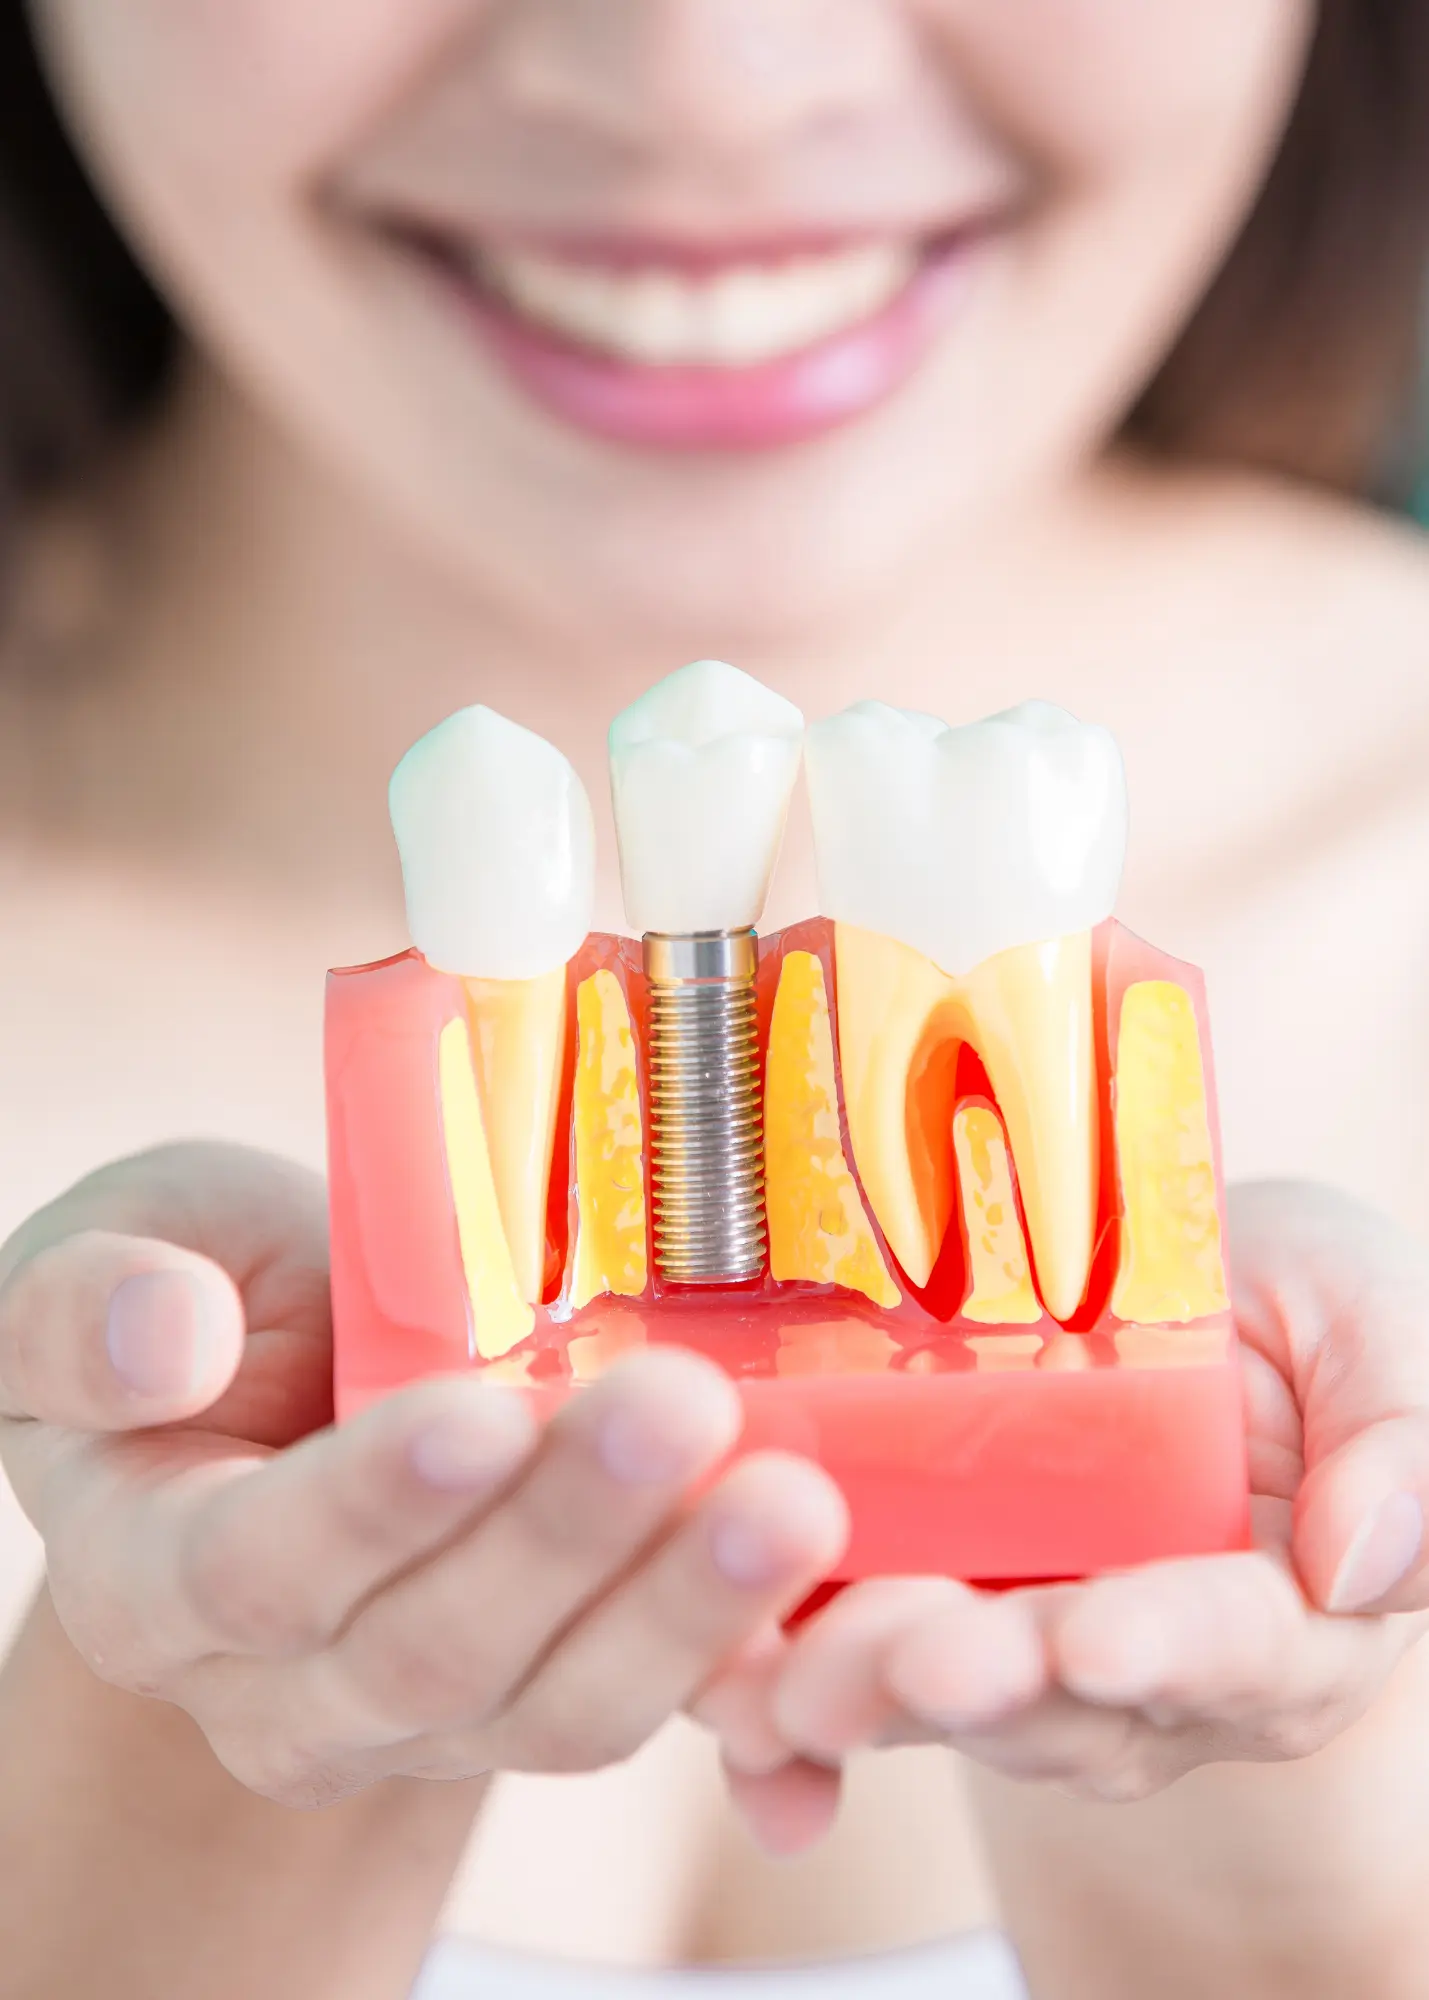 Garden Valley Family & Cosmetic Dentistry's Dental Implant treatment